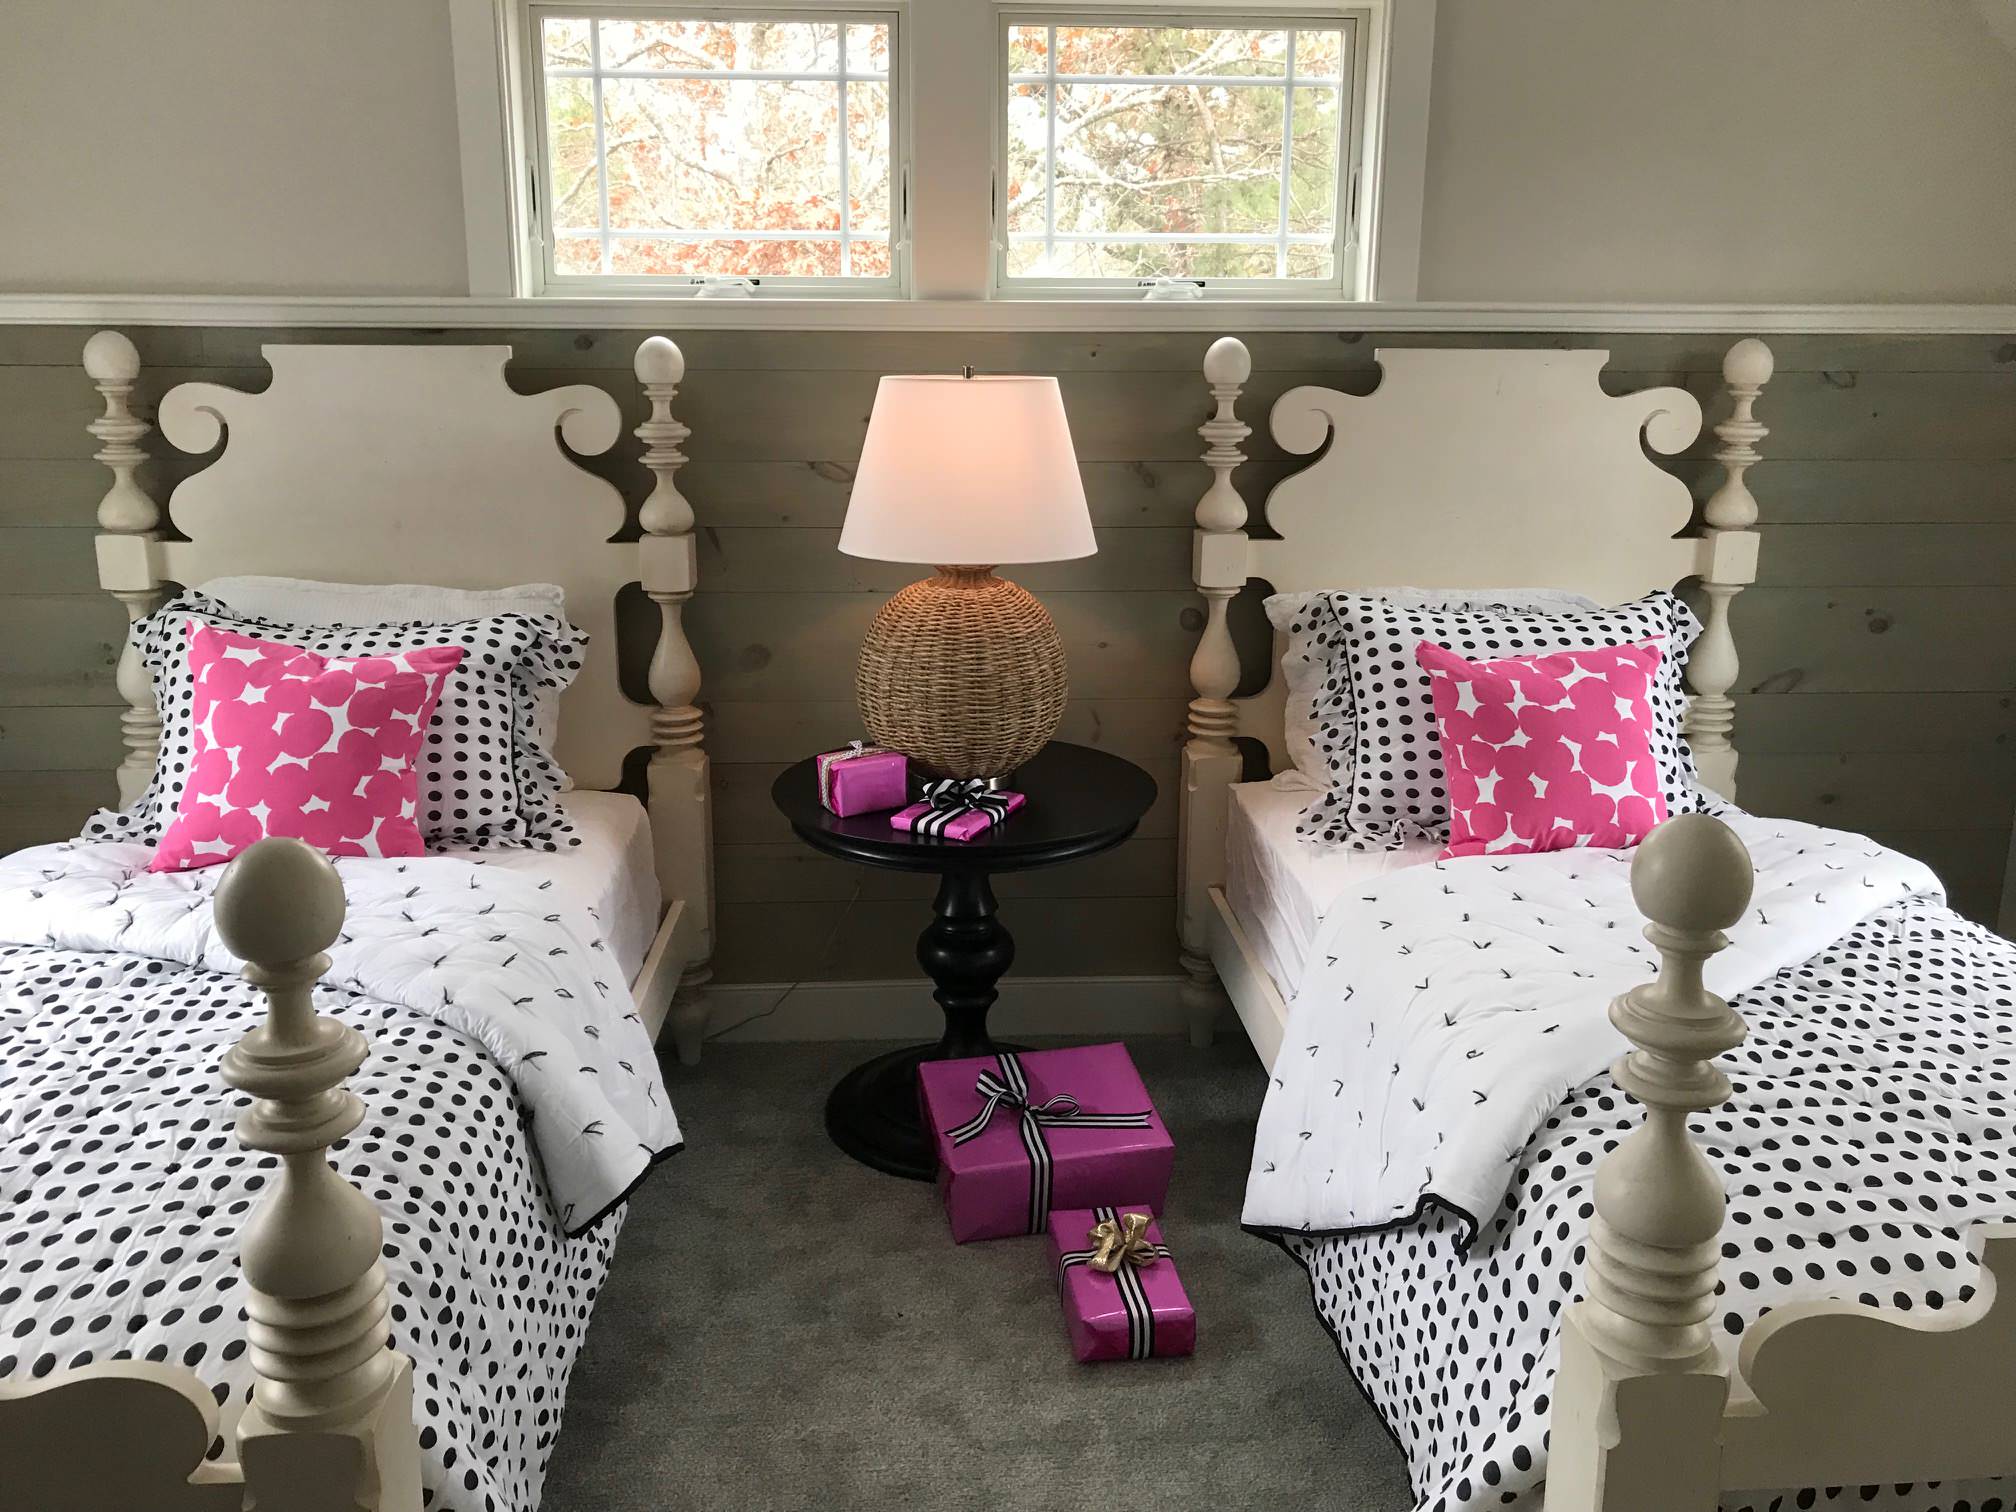 Kate Spade Christmas - Modern - Bedroom - Boston - by Erin Woodbury for  Ethan Allen | Houzz